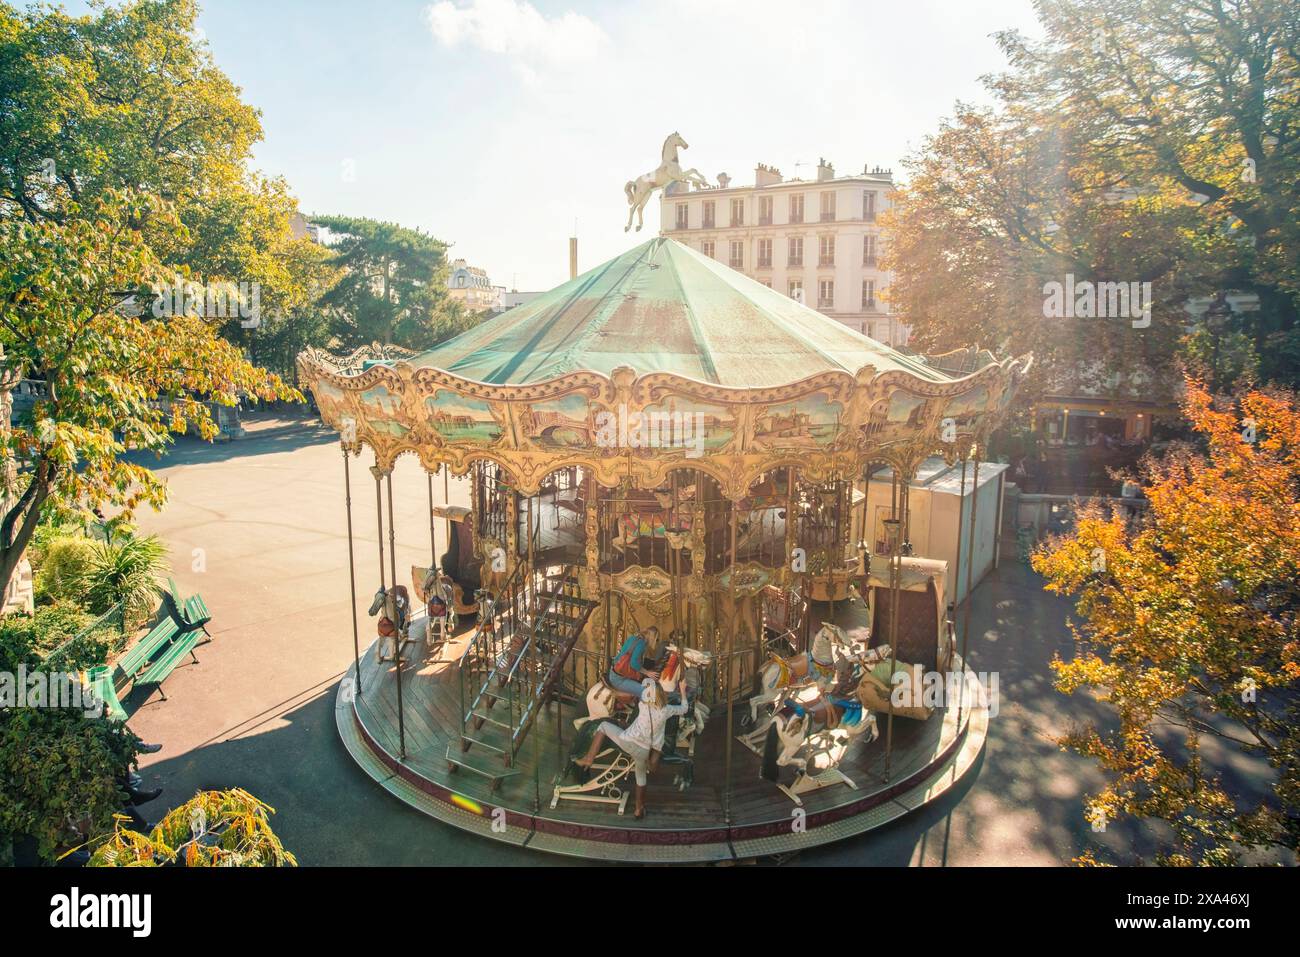 Sunlit vintage carousel in a tranquil park setting. Stock Photo